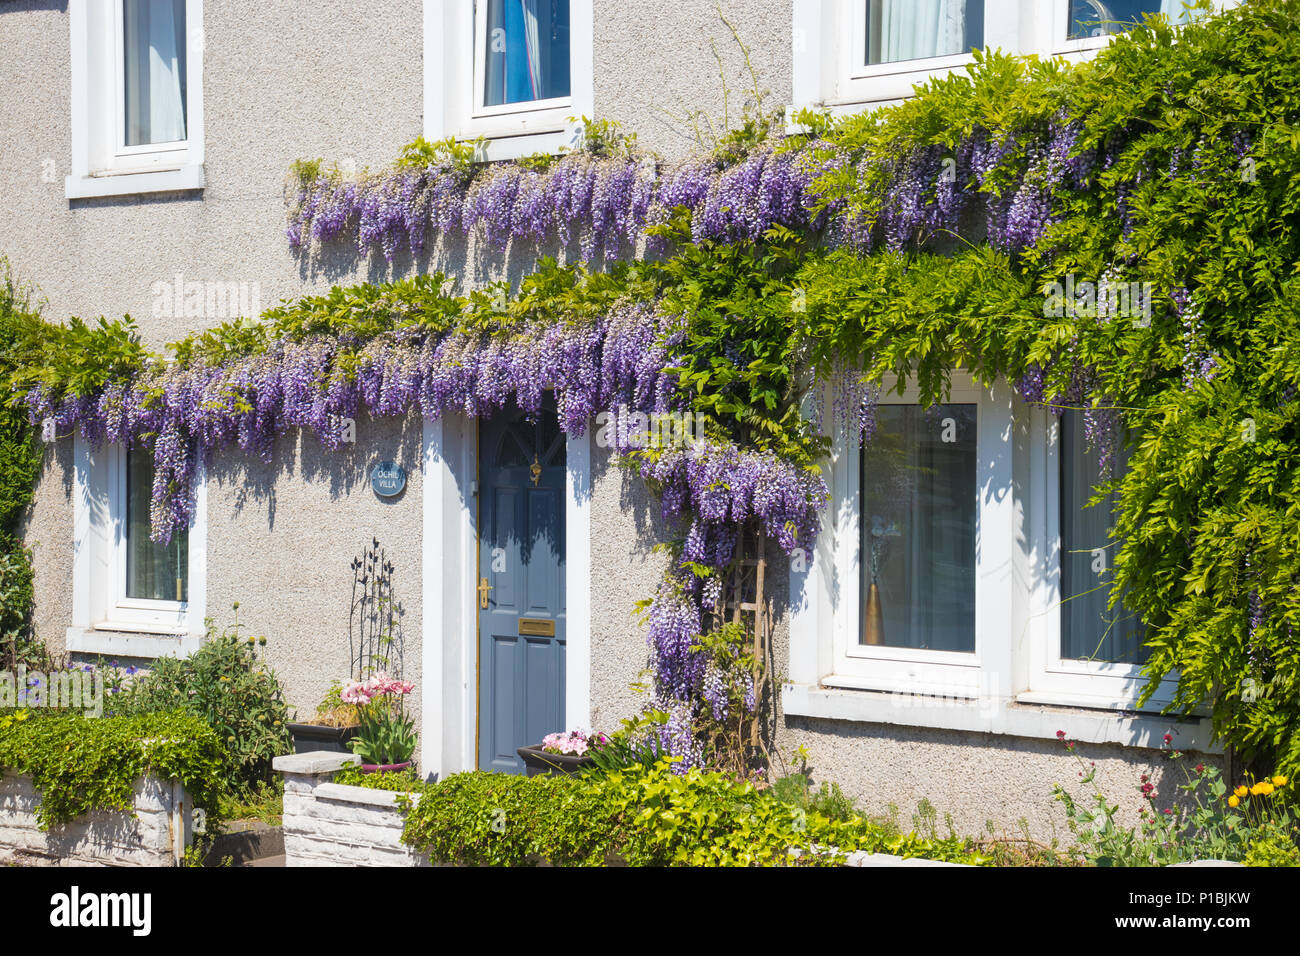 Wisteria climbing over a house front in Scotland. Stock Photo